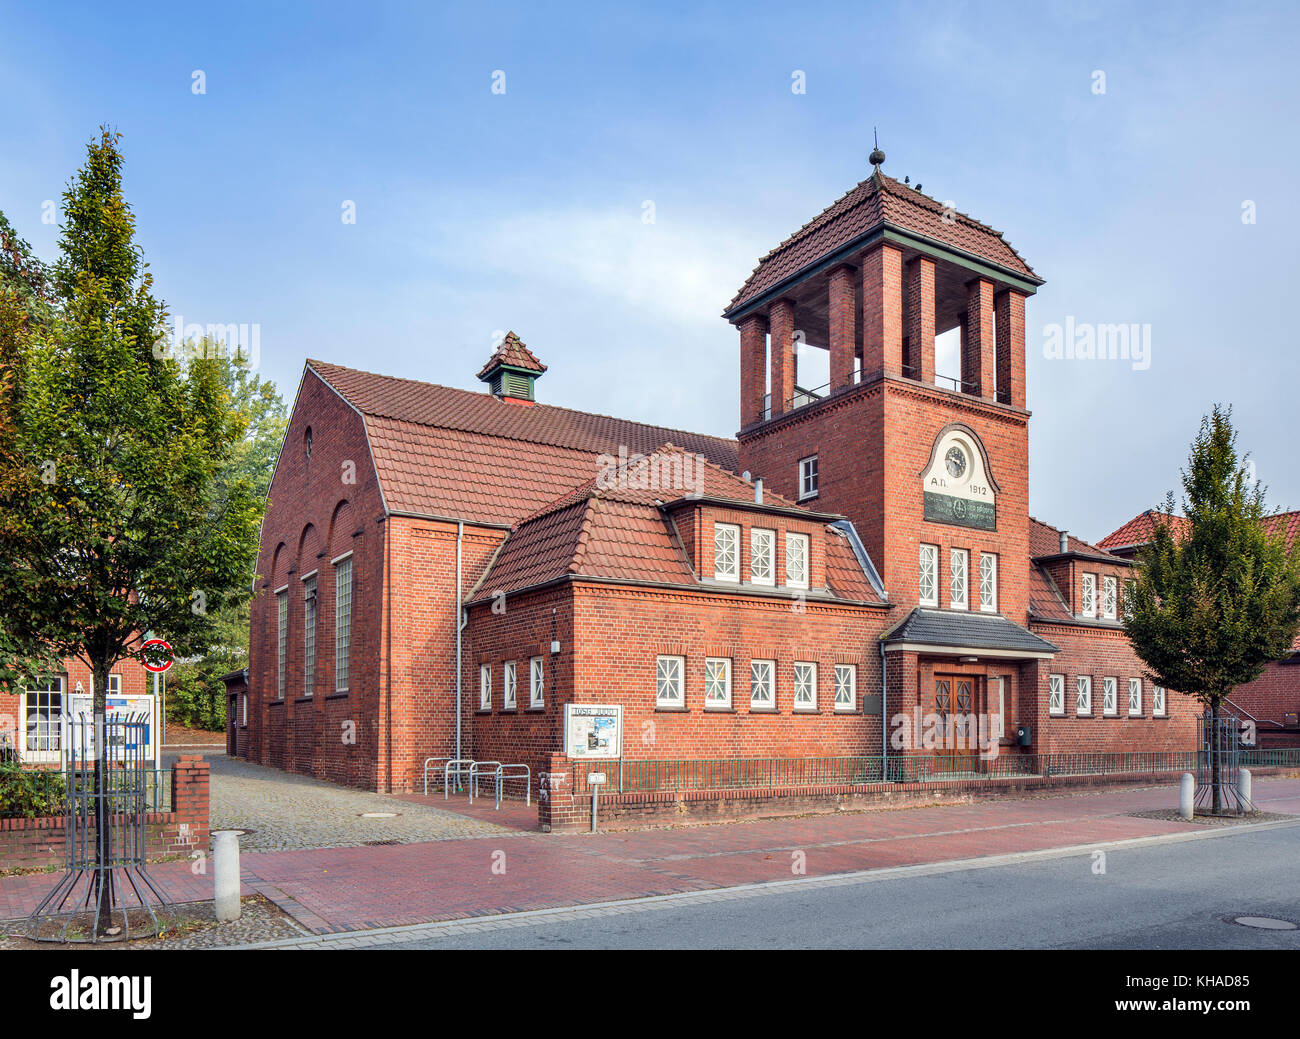 Old gymnasium or Ries Gymnasium, Ries Building, Ritterhude, Lower Saxony, Germany Stock Photo